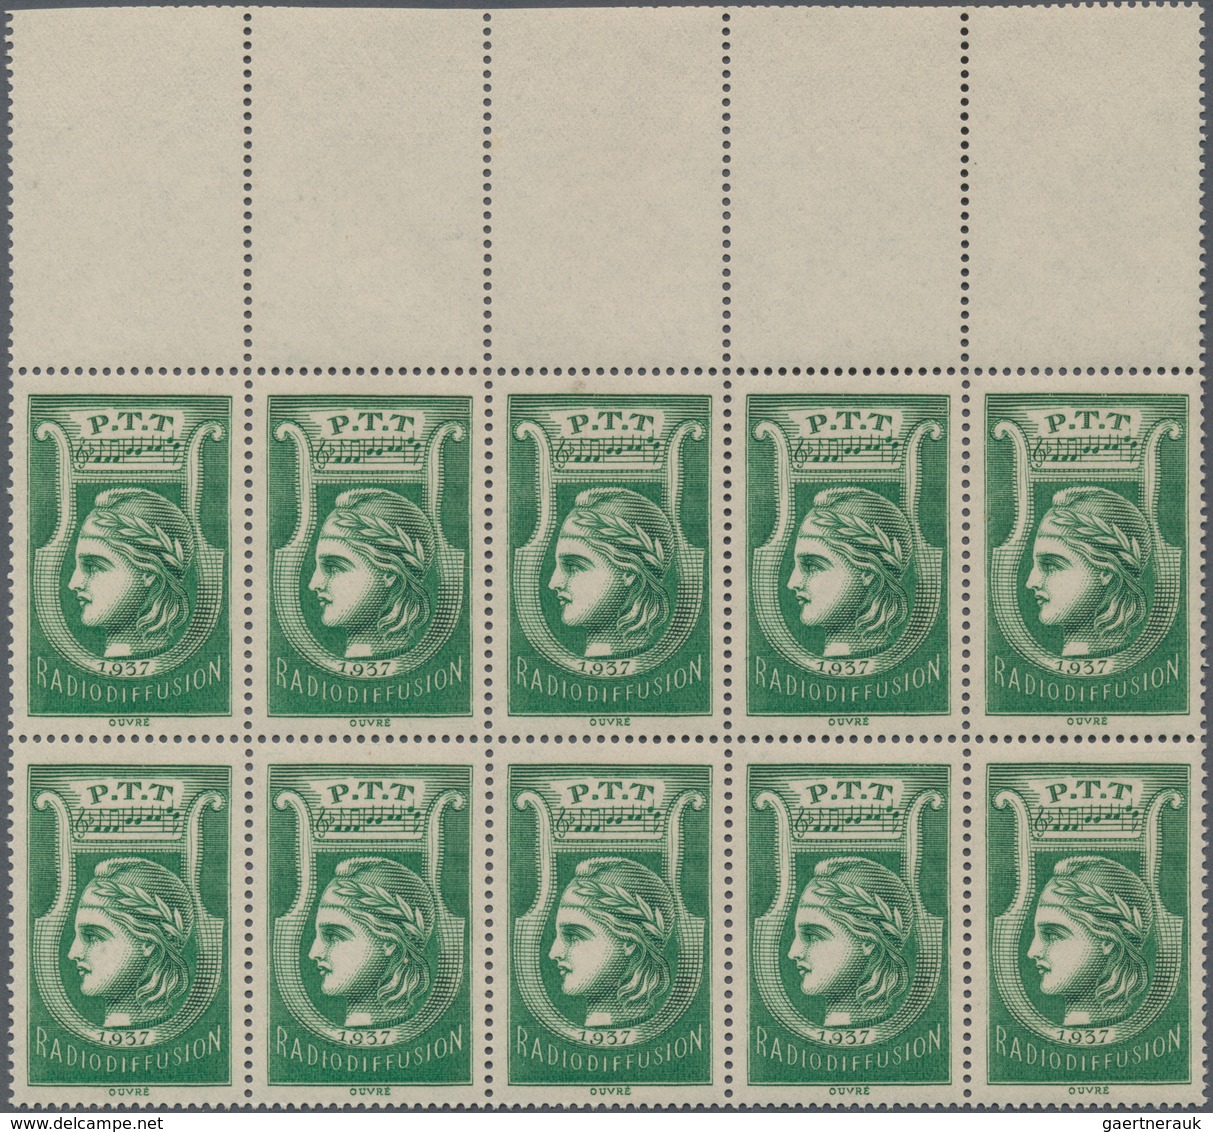 Frankreich - Portomarken: 1937, Radiodiffusion Stamp In Green, Lot Of 100 Stamps Within Multiples, M - 1960-.... Used